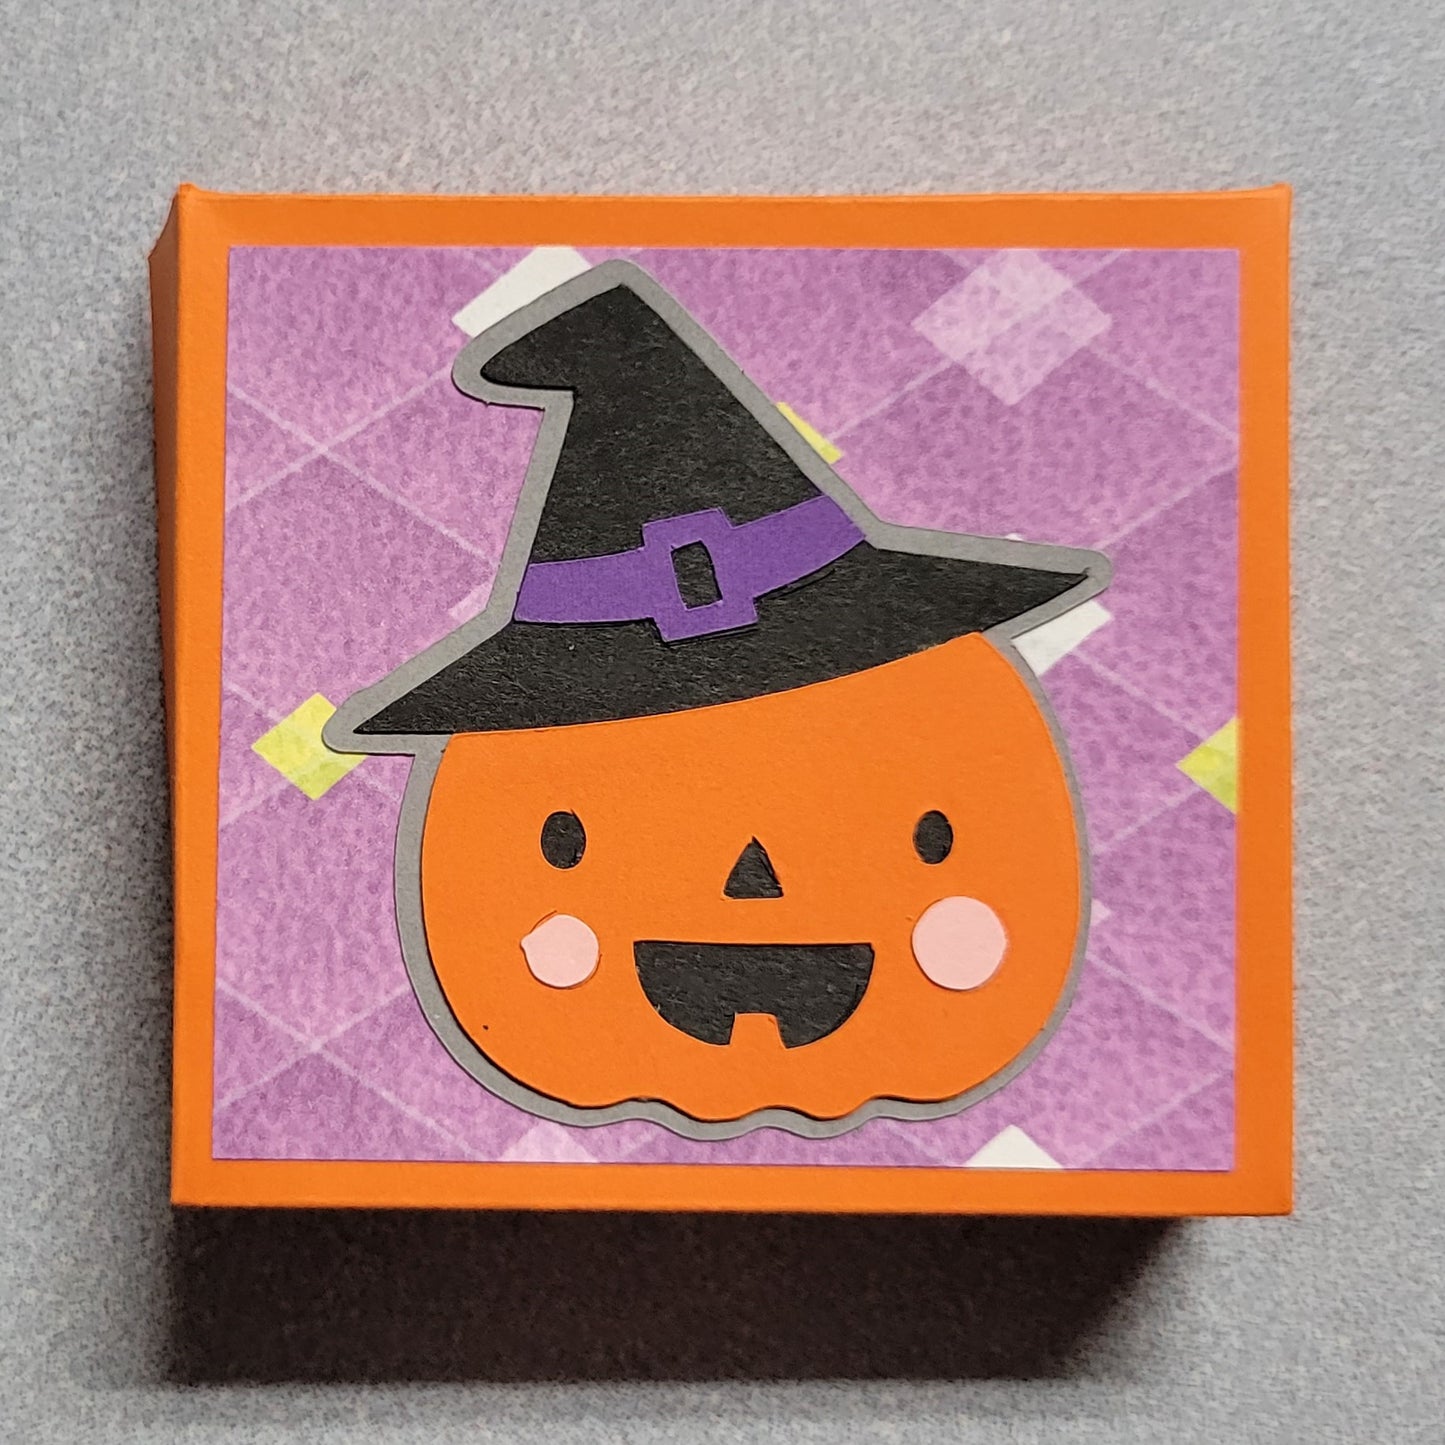 Candy Nugget Box Halloween